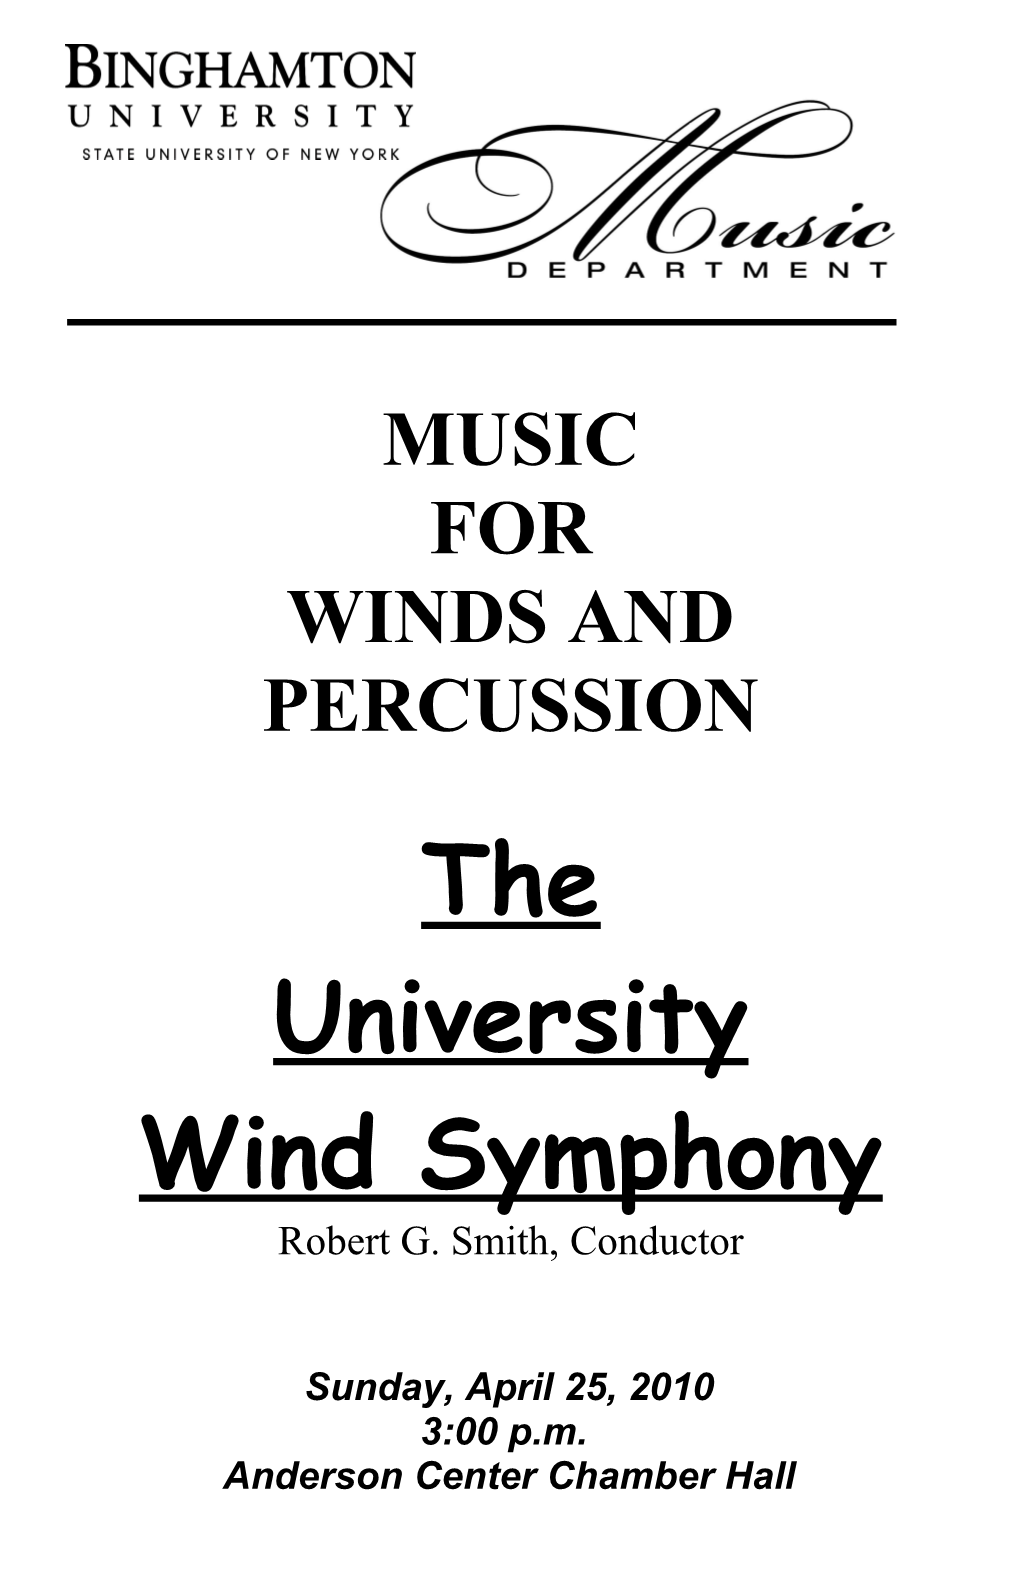 Winds and Percussion